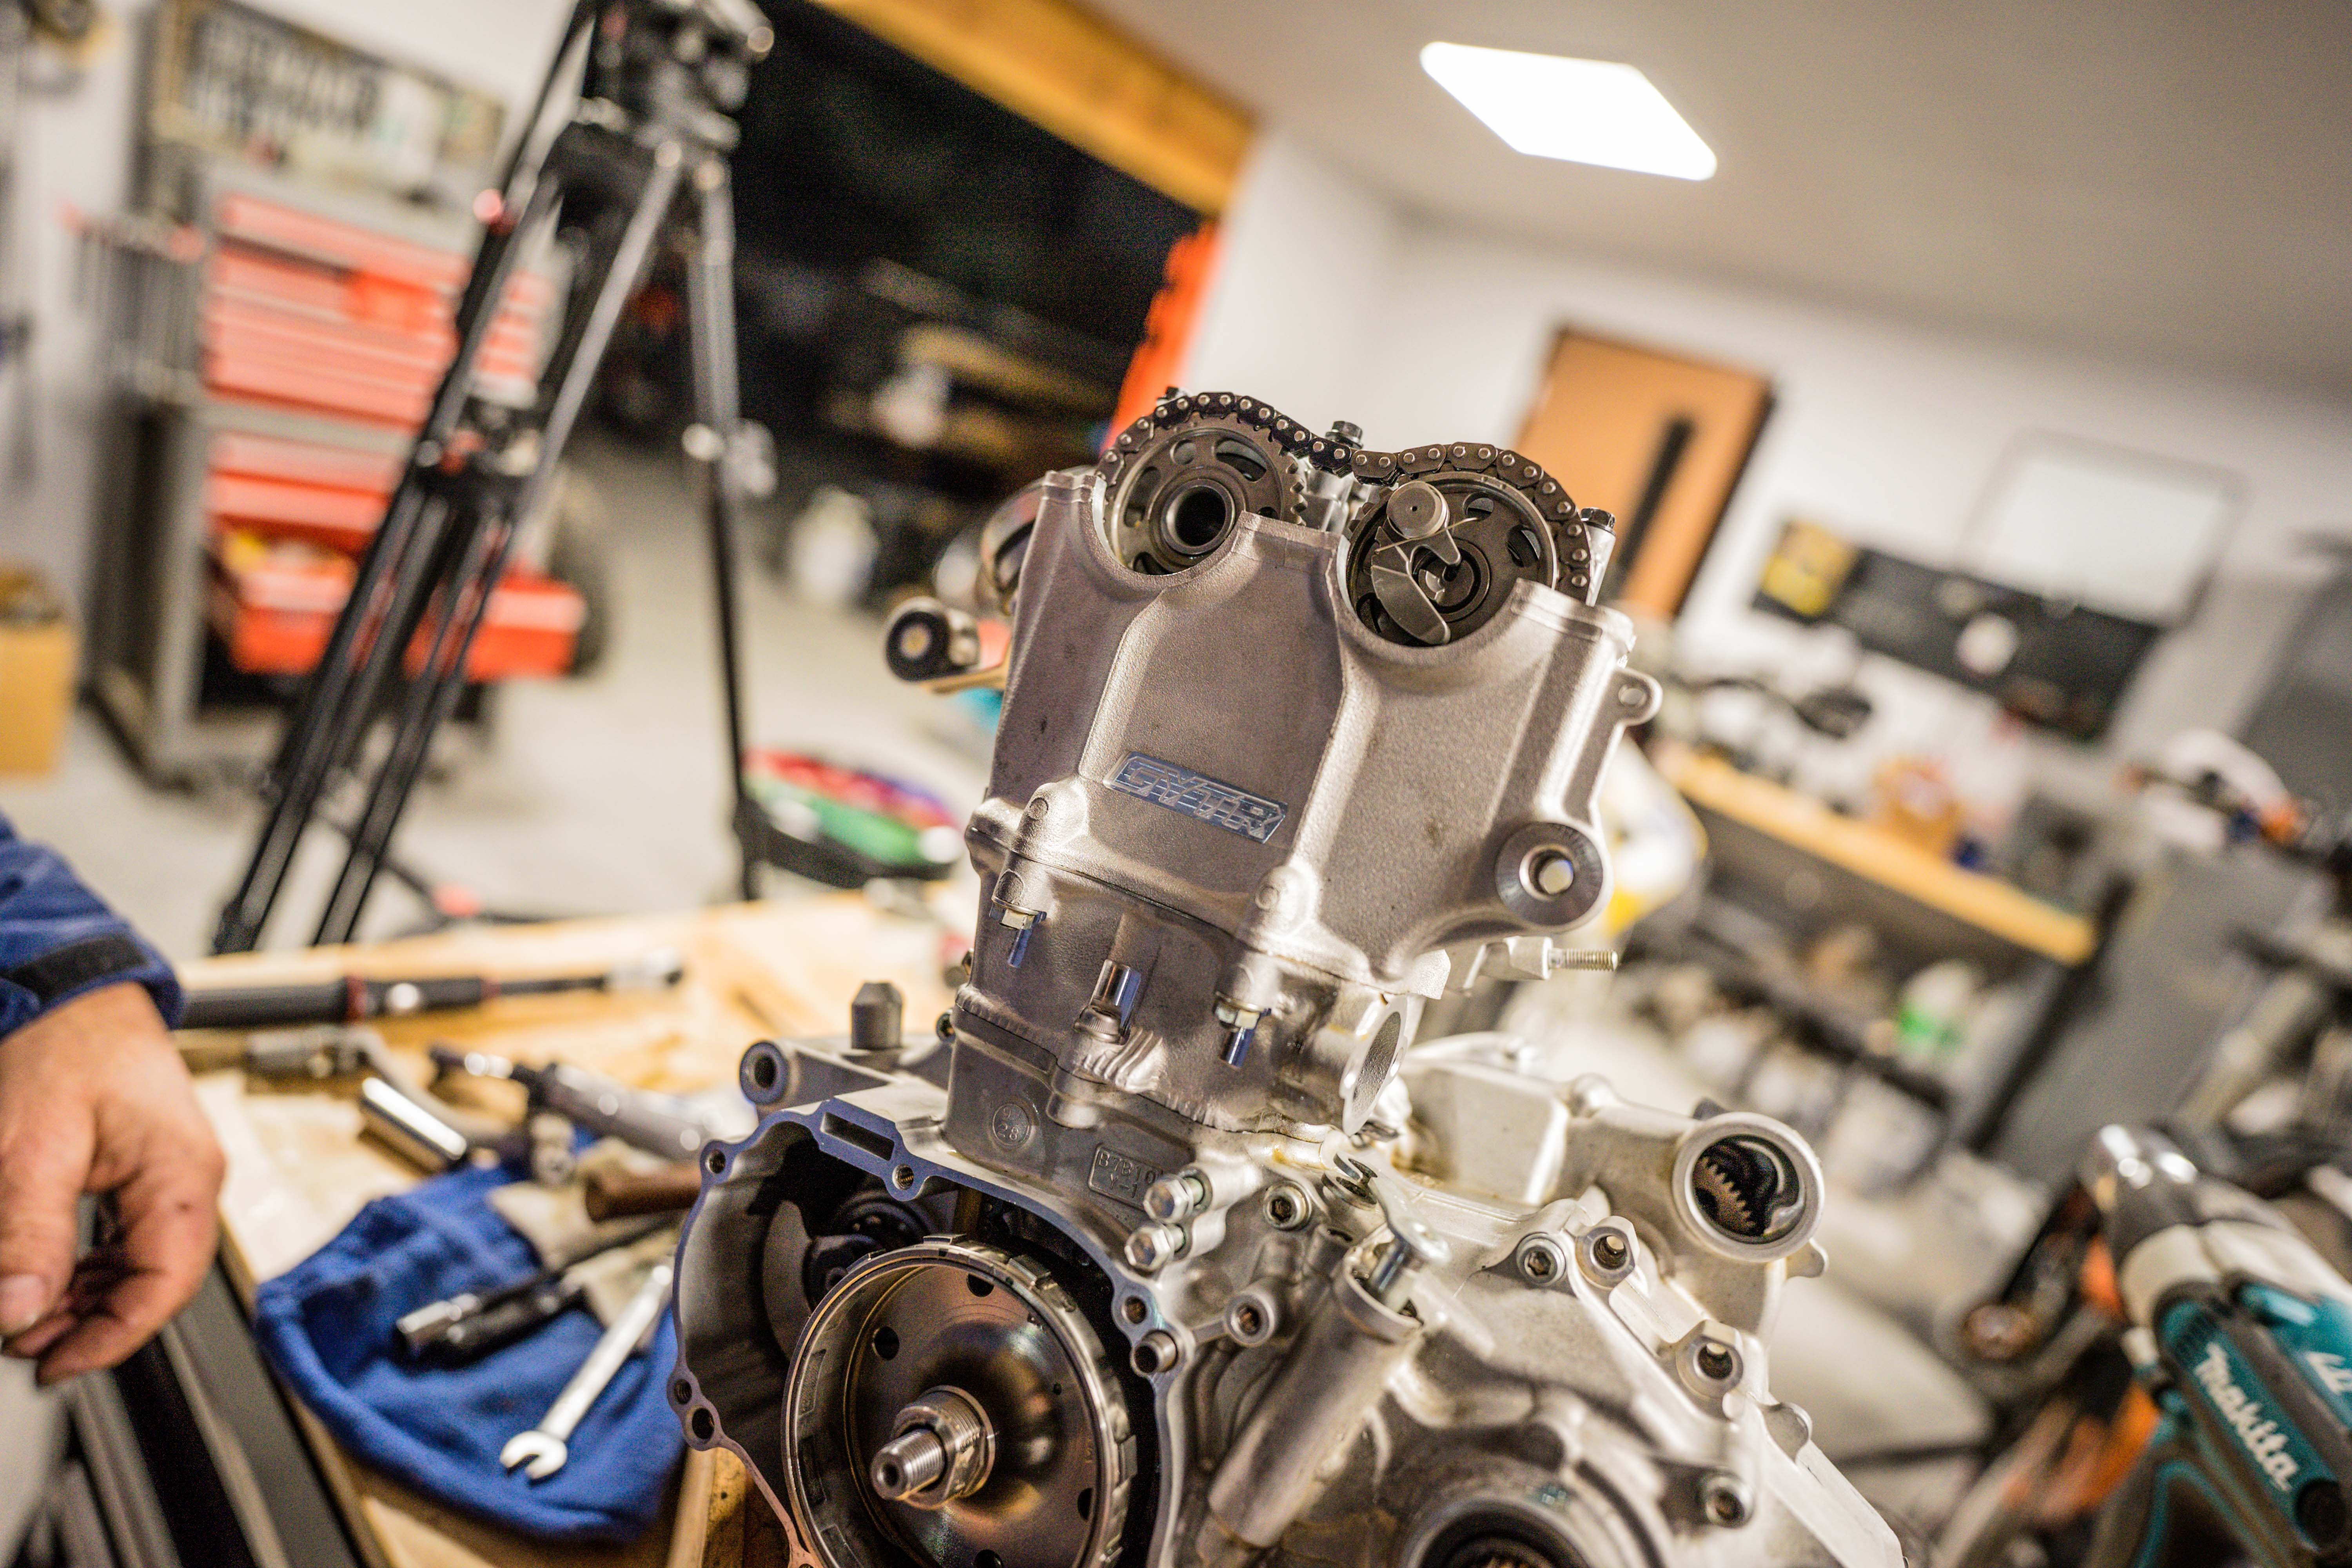 YZ250FX engine on the bench